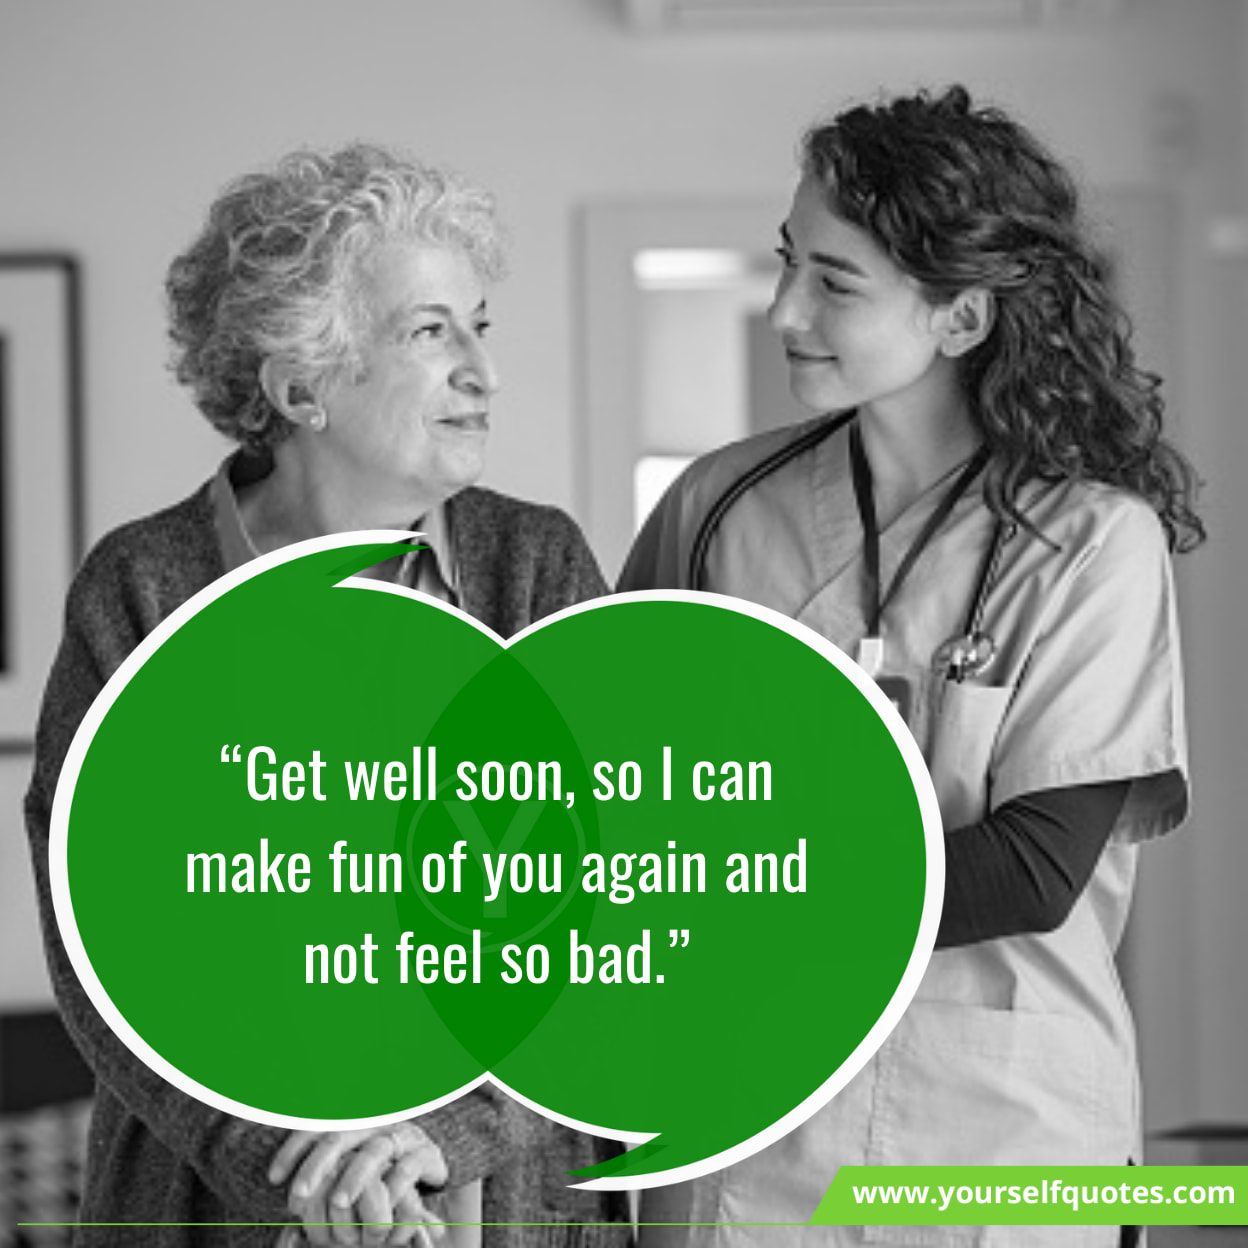 Getting Well Soon Quotes